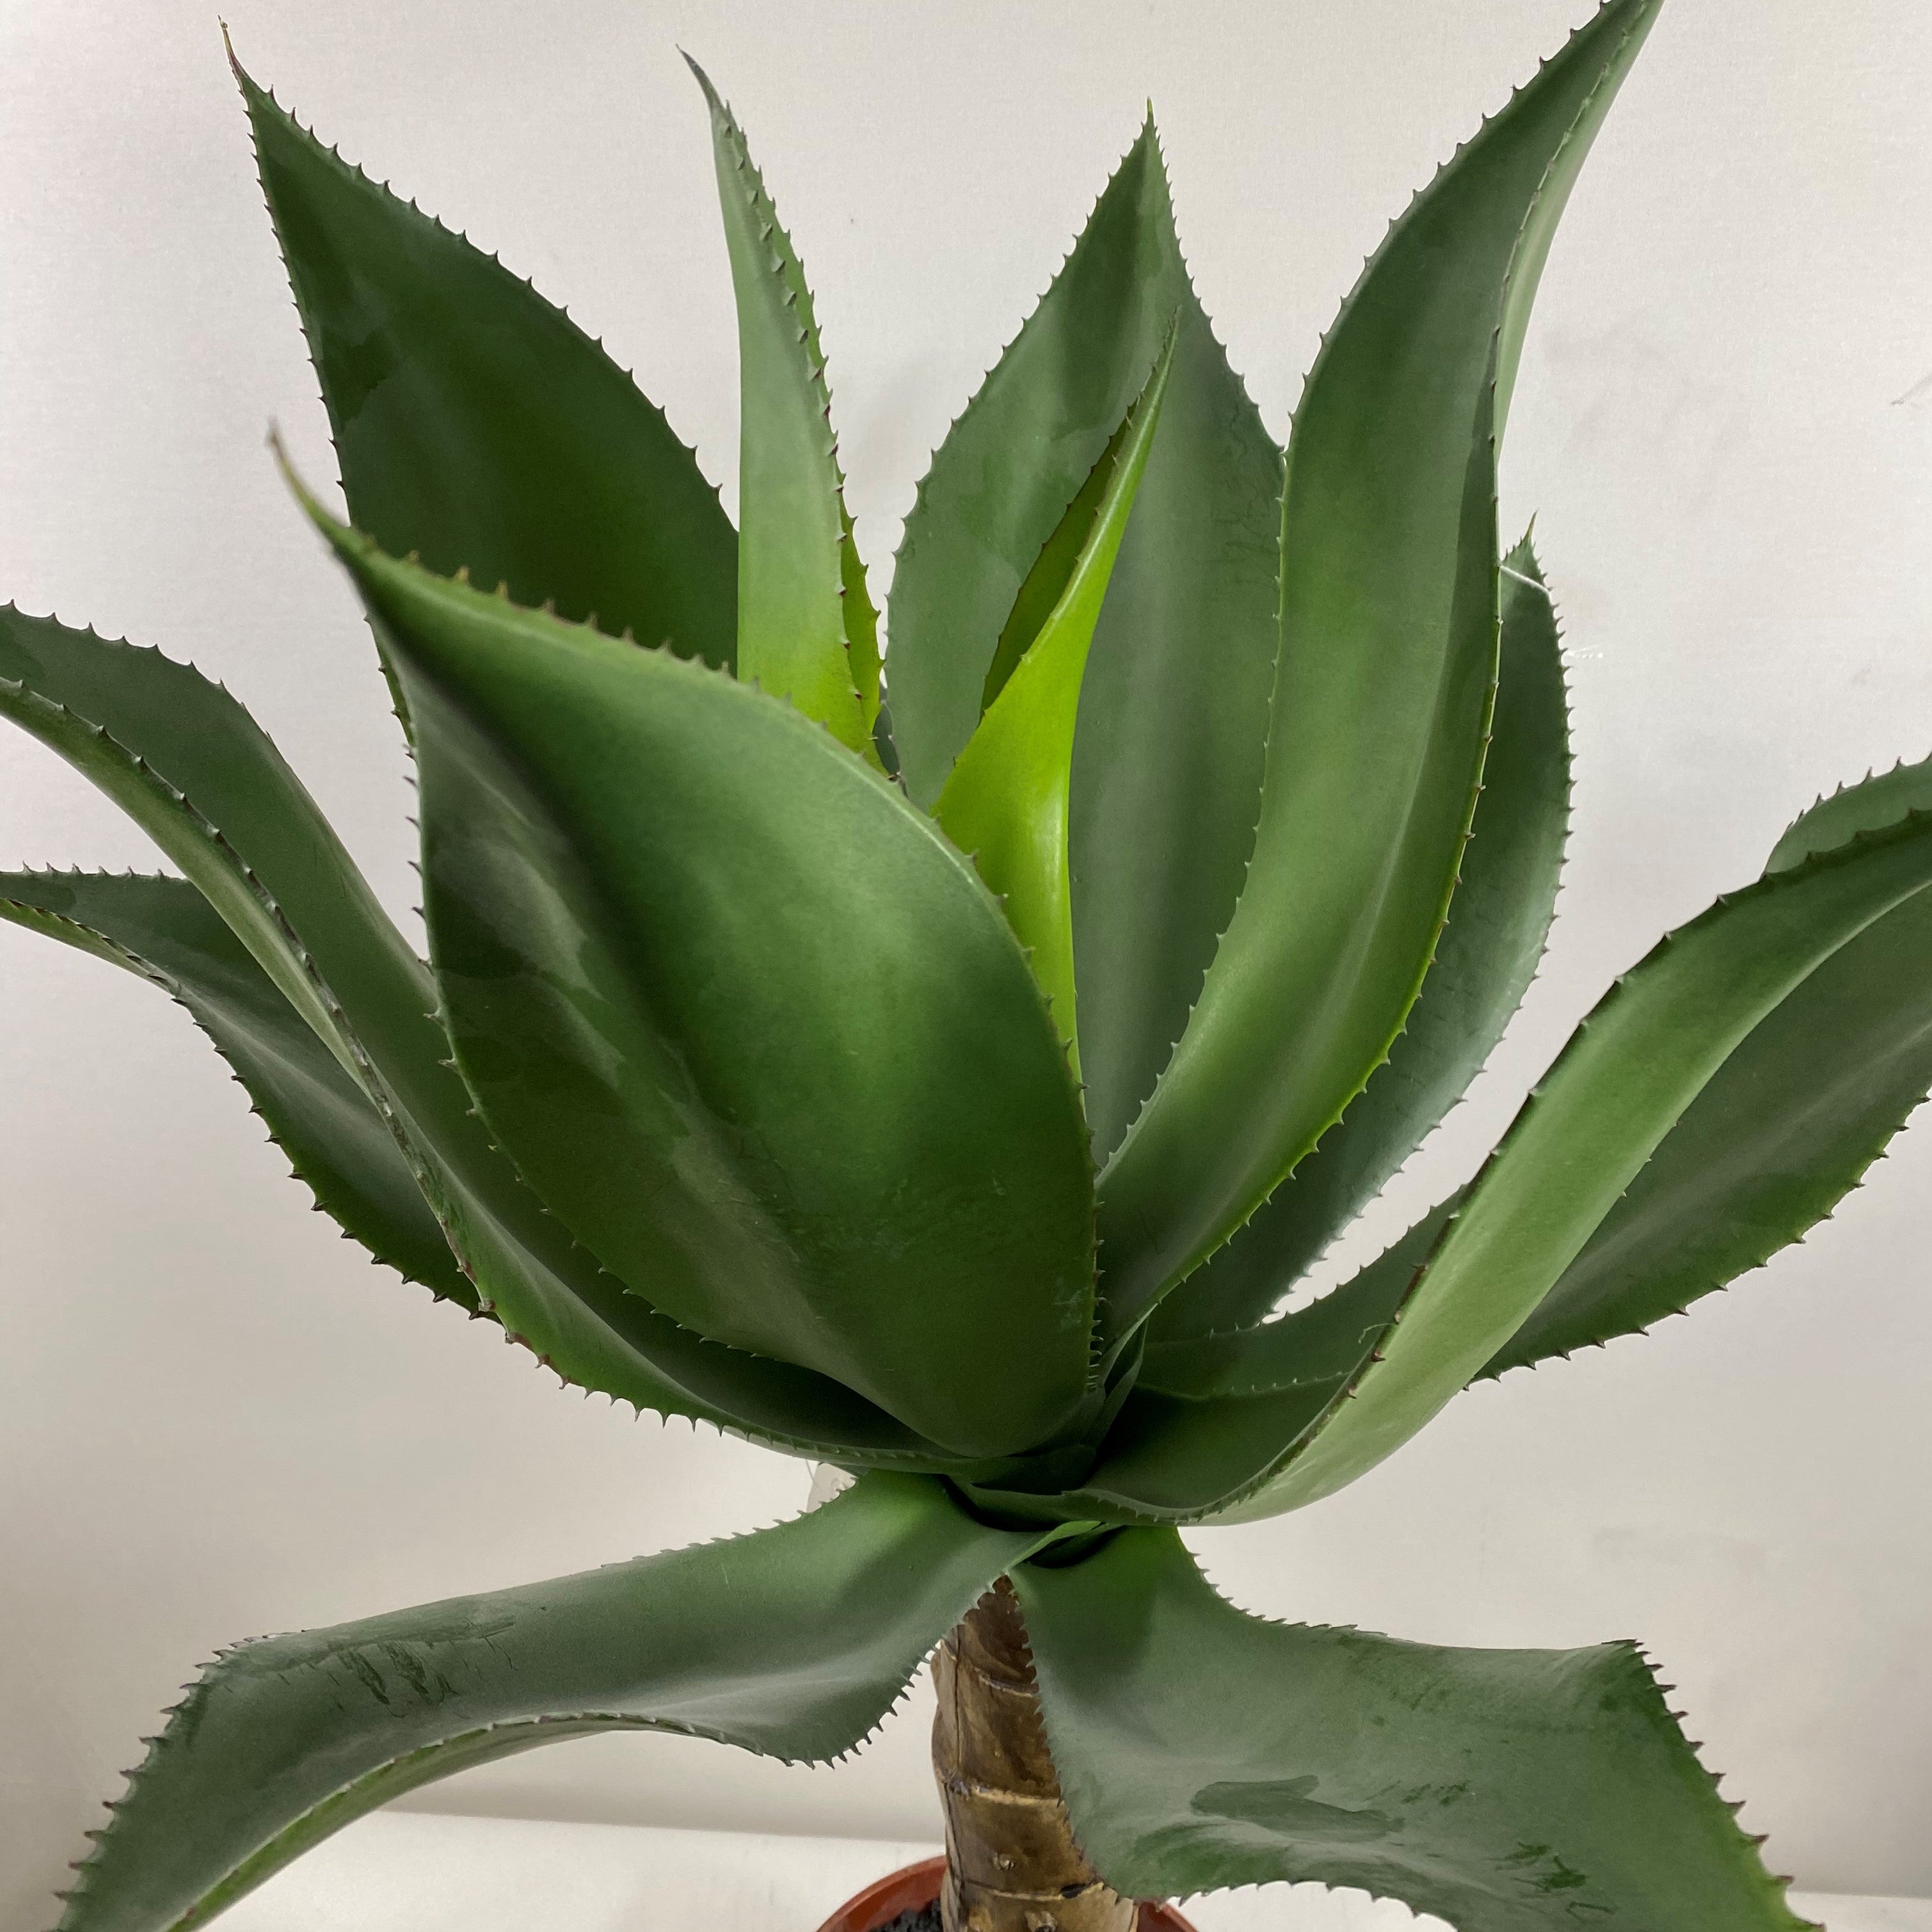 Sawtooth Agave 32" with pot